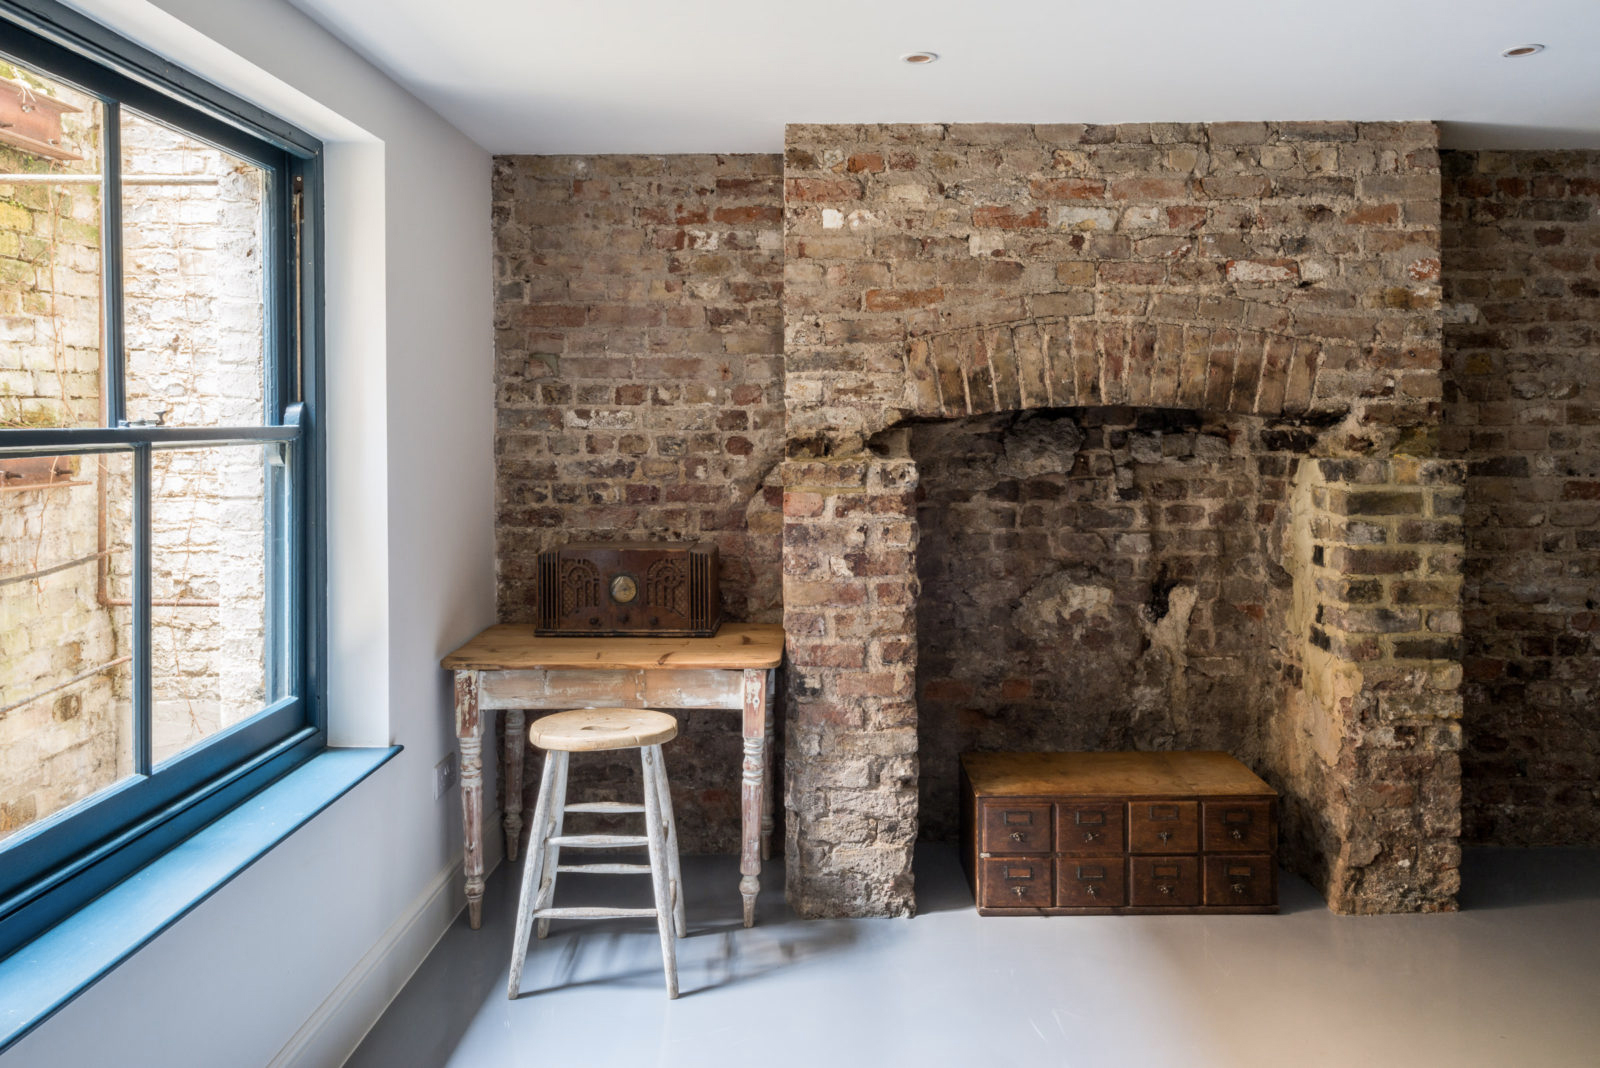 Converted Victorian butcher's for sale in London is decked in period features